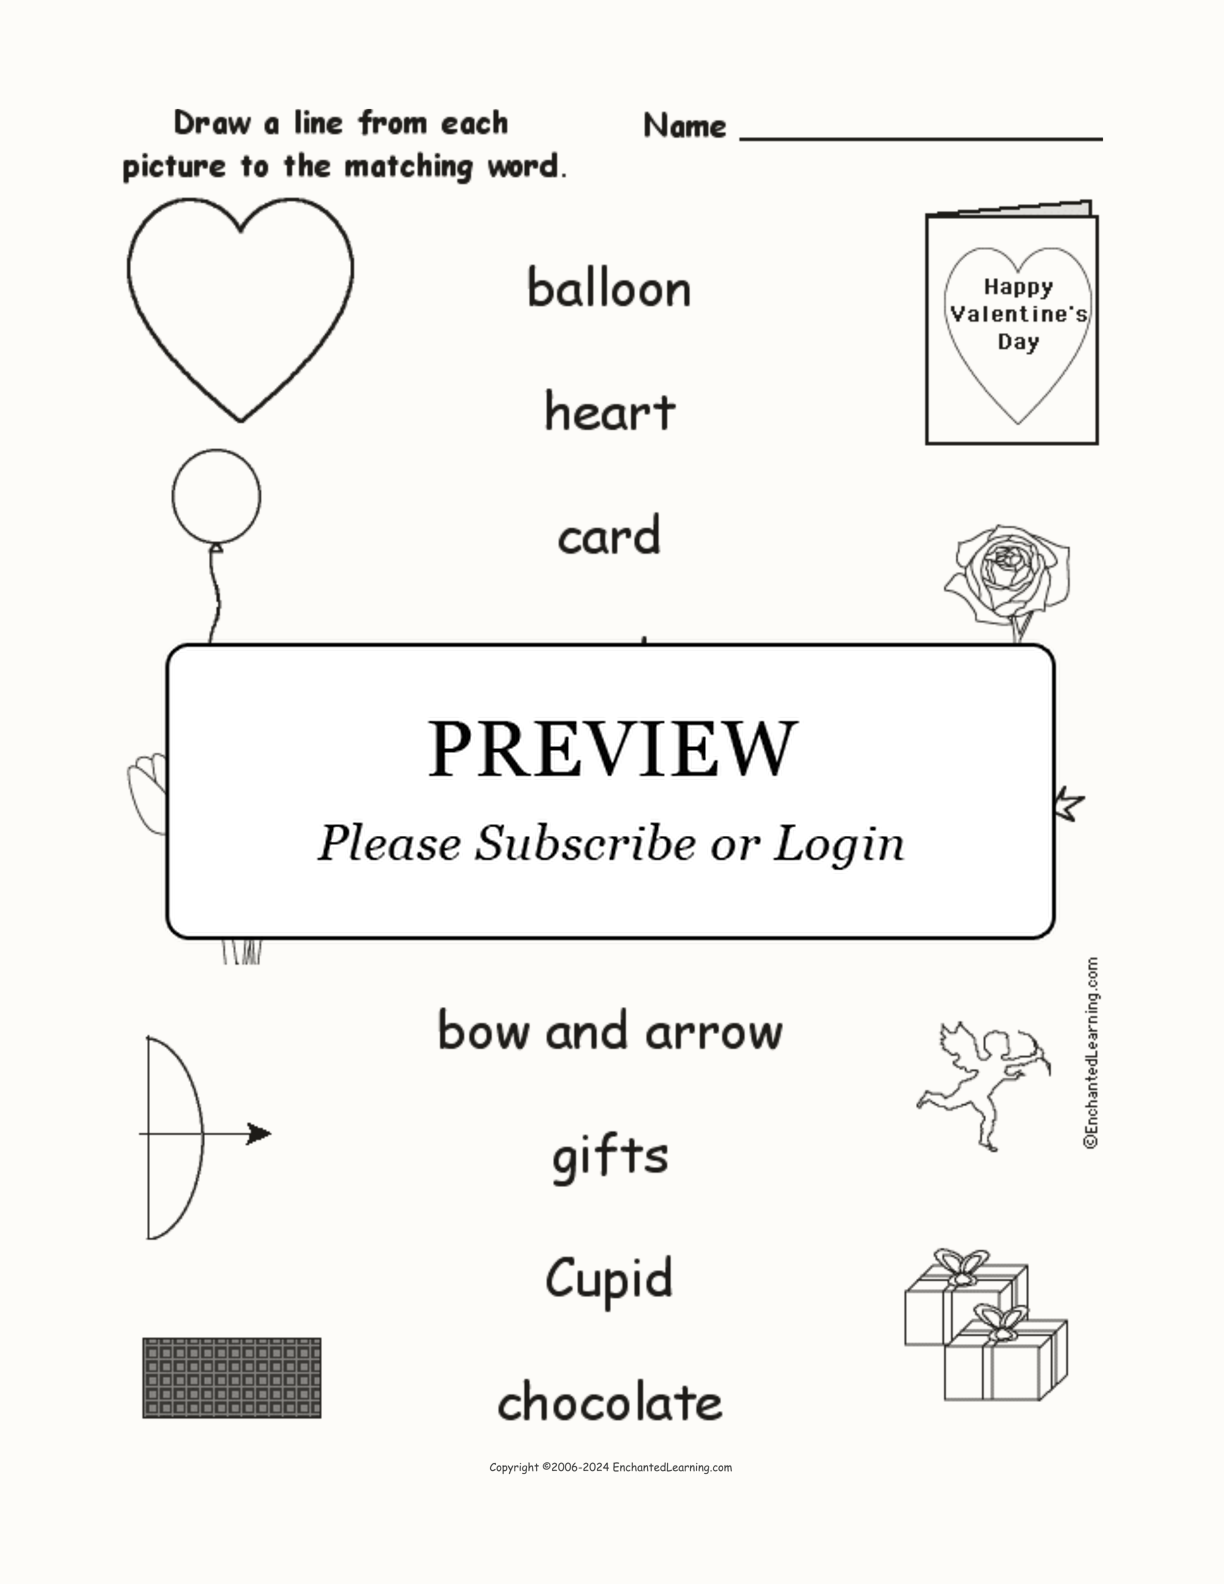 Valentine's Day - Match the Words to the Pictures interactive worksheet page 1